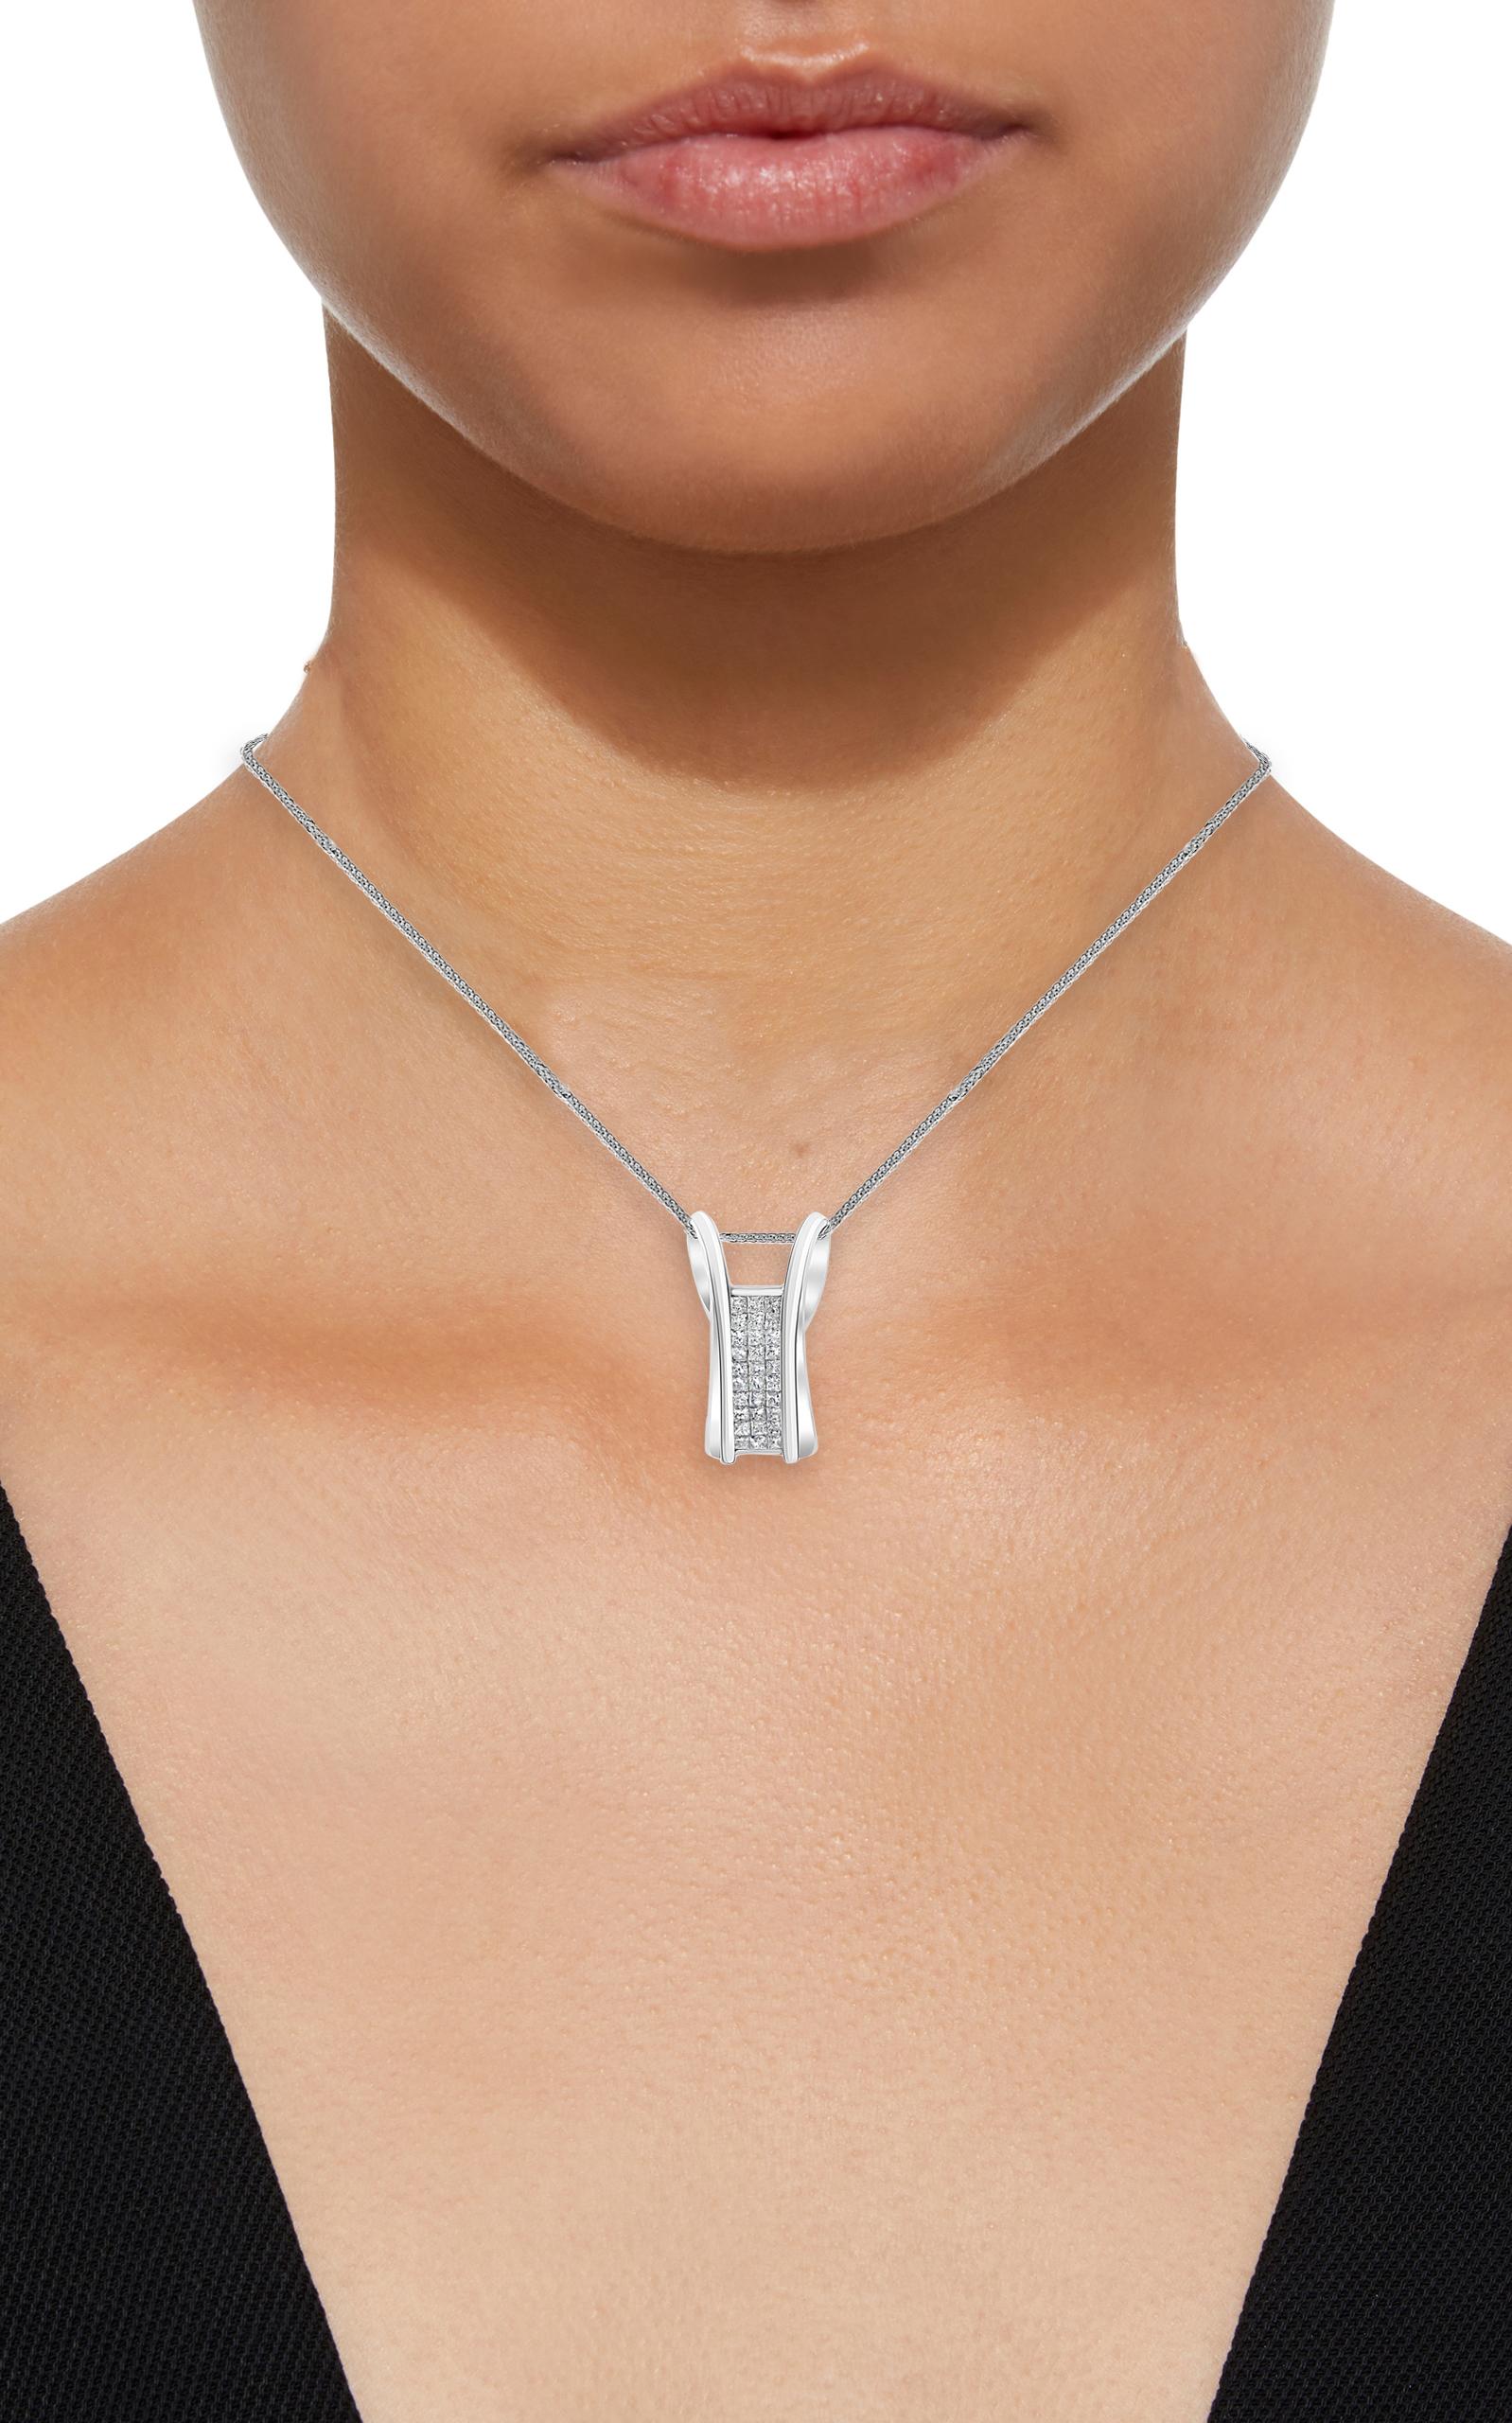 2.2 Ct Princess Cut Diamond Pendant/ Necklace 14 Karat White Gold with Chain
There are 30 princess cut diamonds 
3 diamonds in each row and there are 10 rows.
Diamond Weight  approximately 2 .2 Carats
Diamonds are SI quality. Lots of shine and